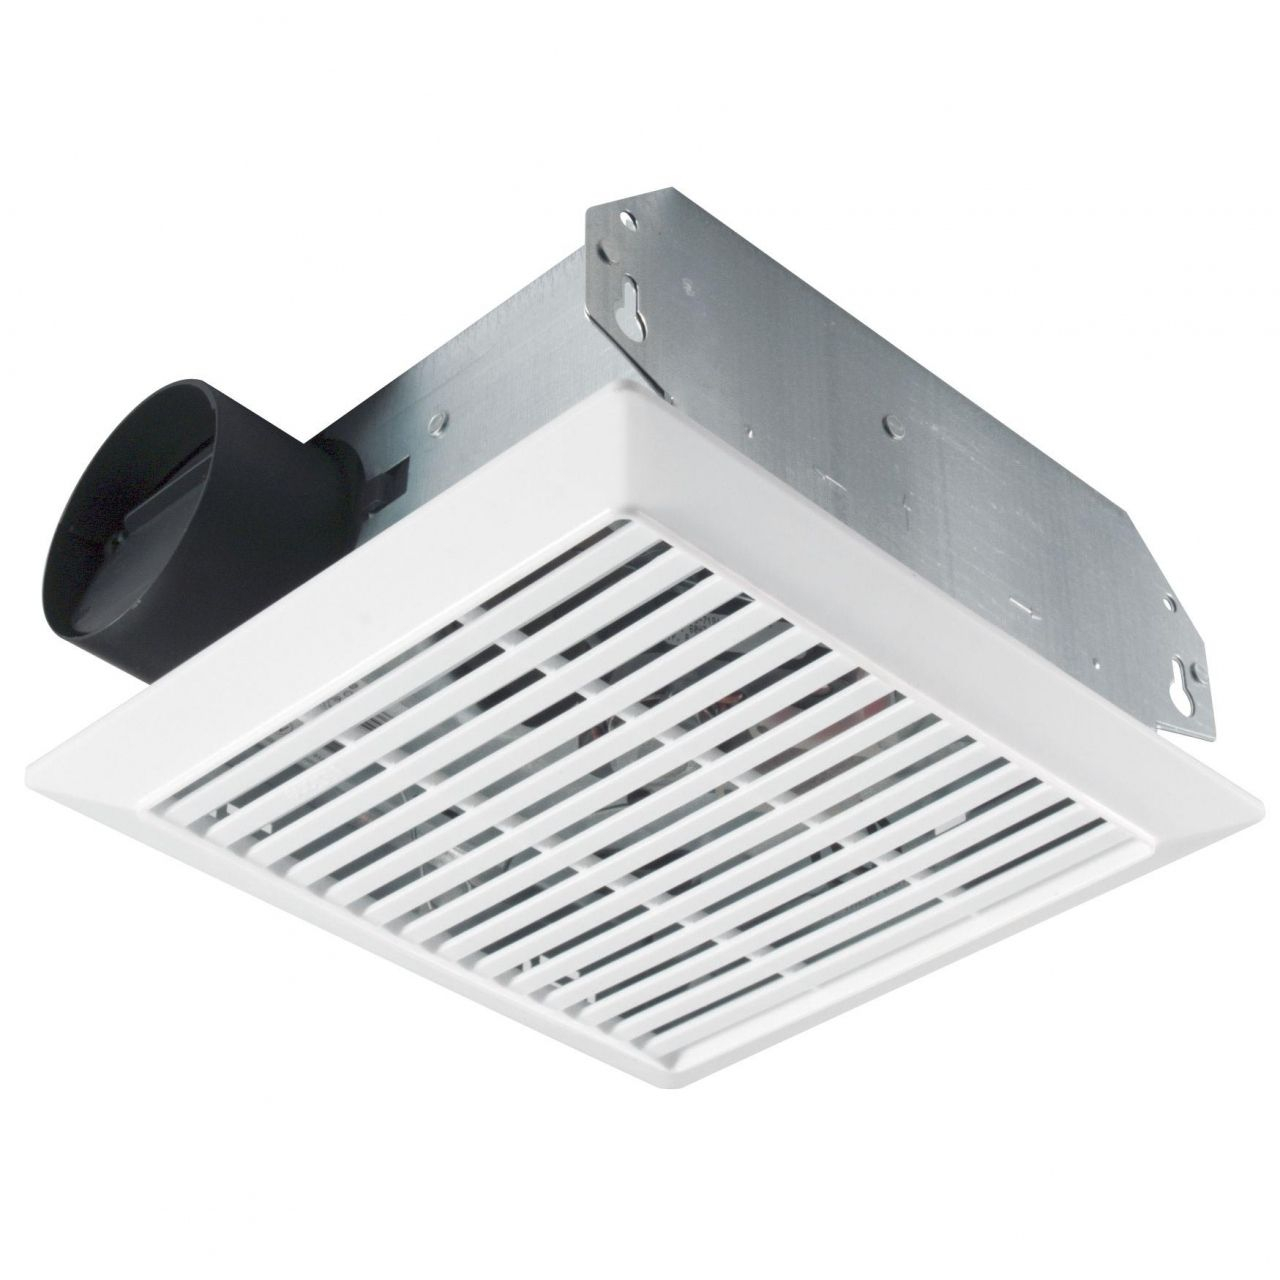 50 Large Bathroom Exhaust Fan Check More At Httpswww throughout proportions 1280 X 1280